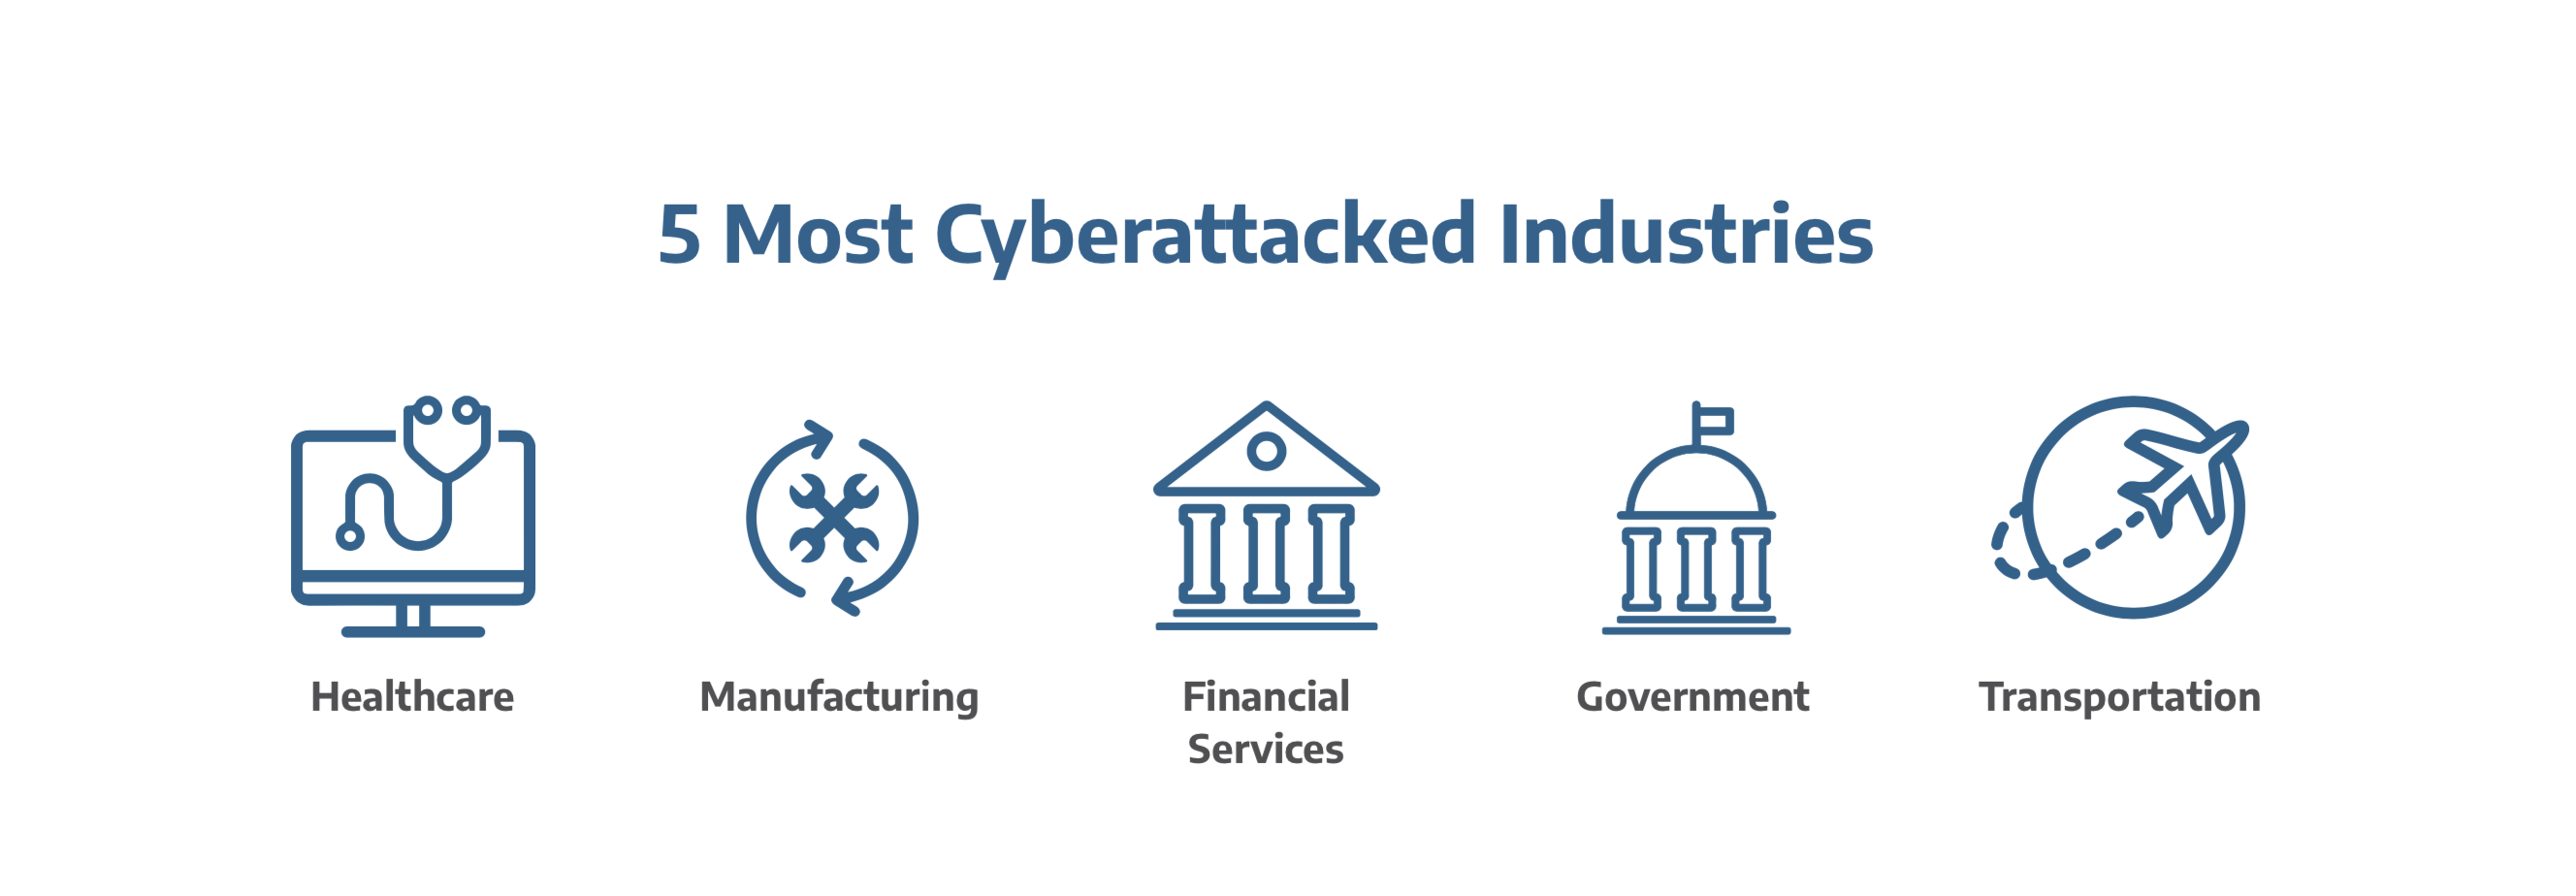 Text of "5 Most Cyberattacked Industries" with graphics of healthcare, manufacturing, financial services, government, and transportation